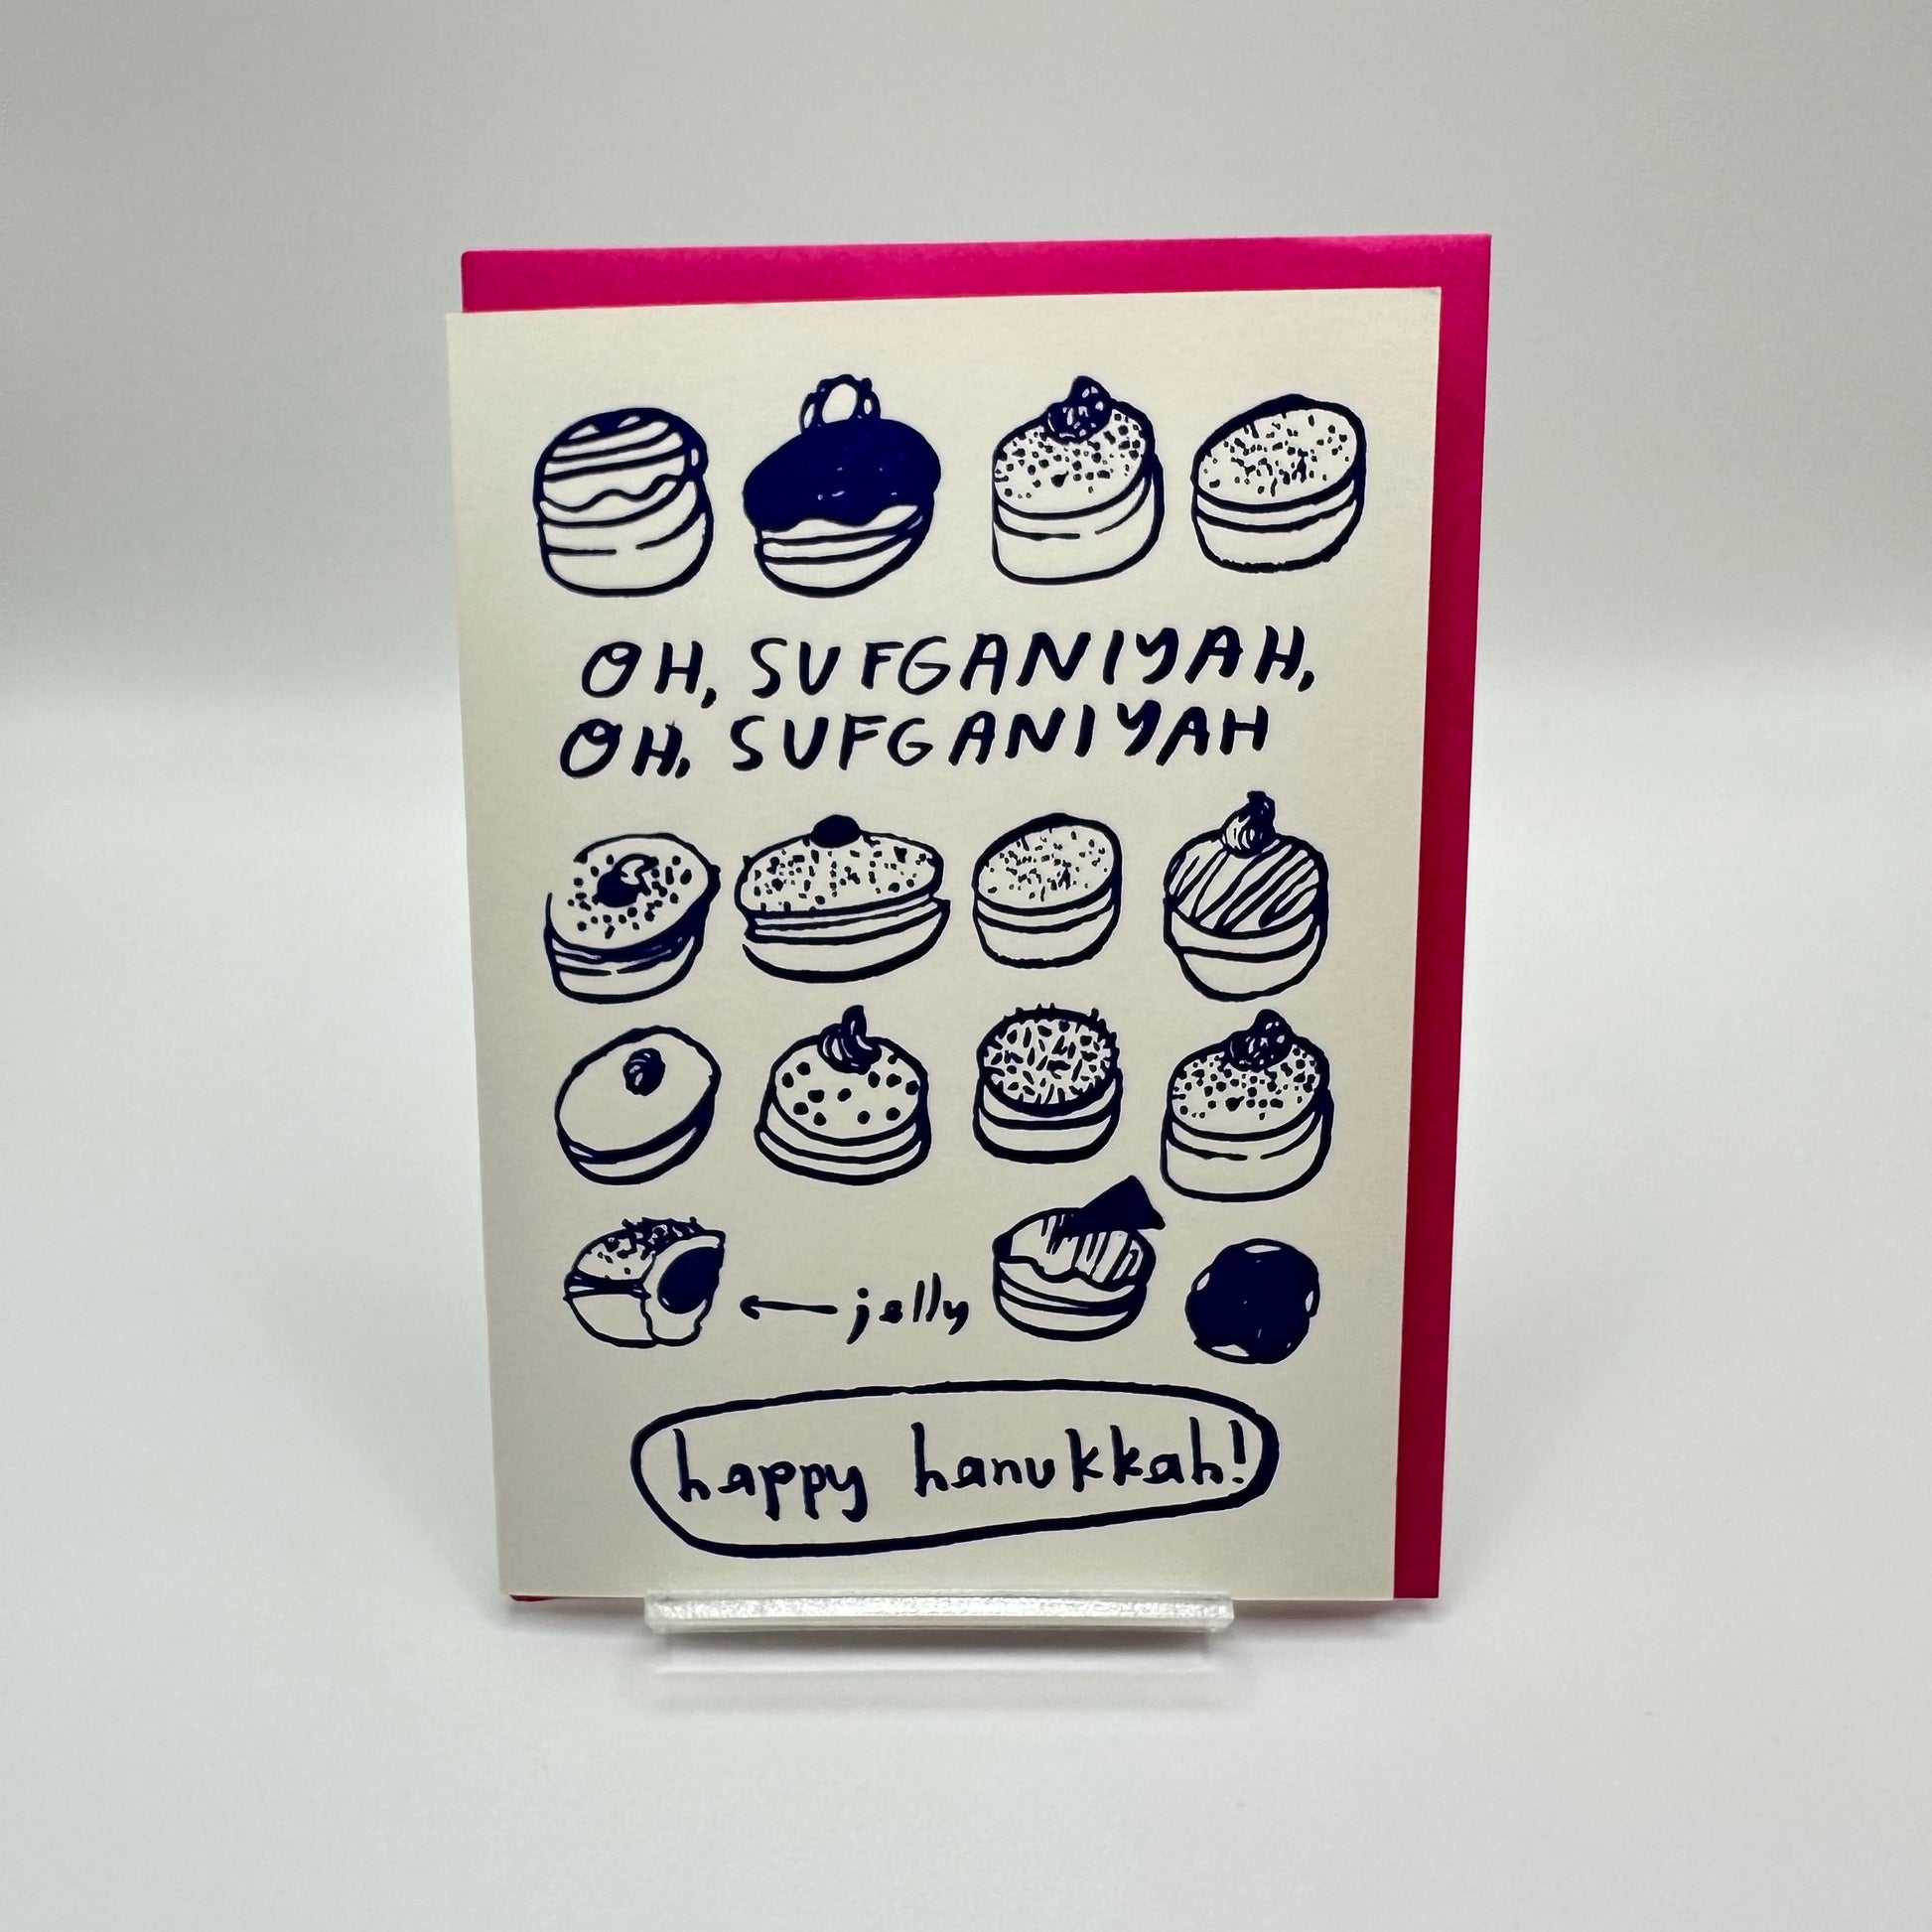 Hanukkah card filled with assorted jelly donuts. Card reads" Oh Sufganiyah, oh Sufganiyah..